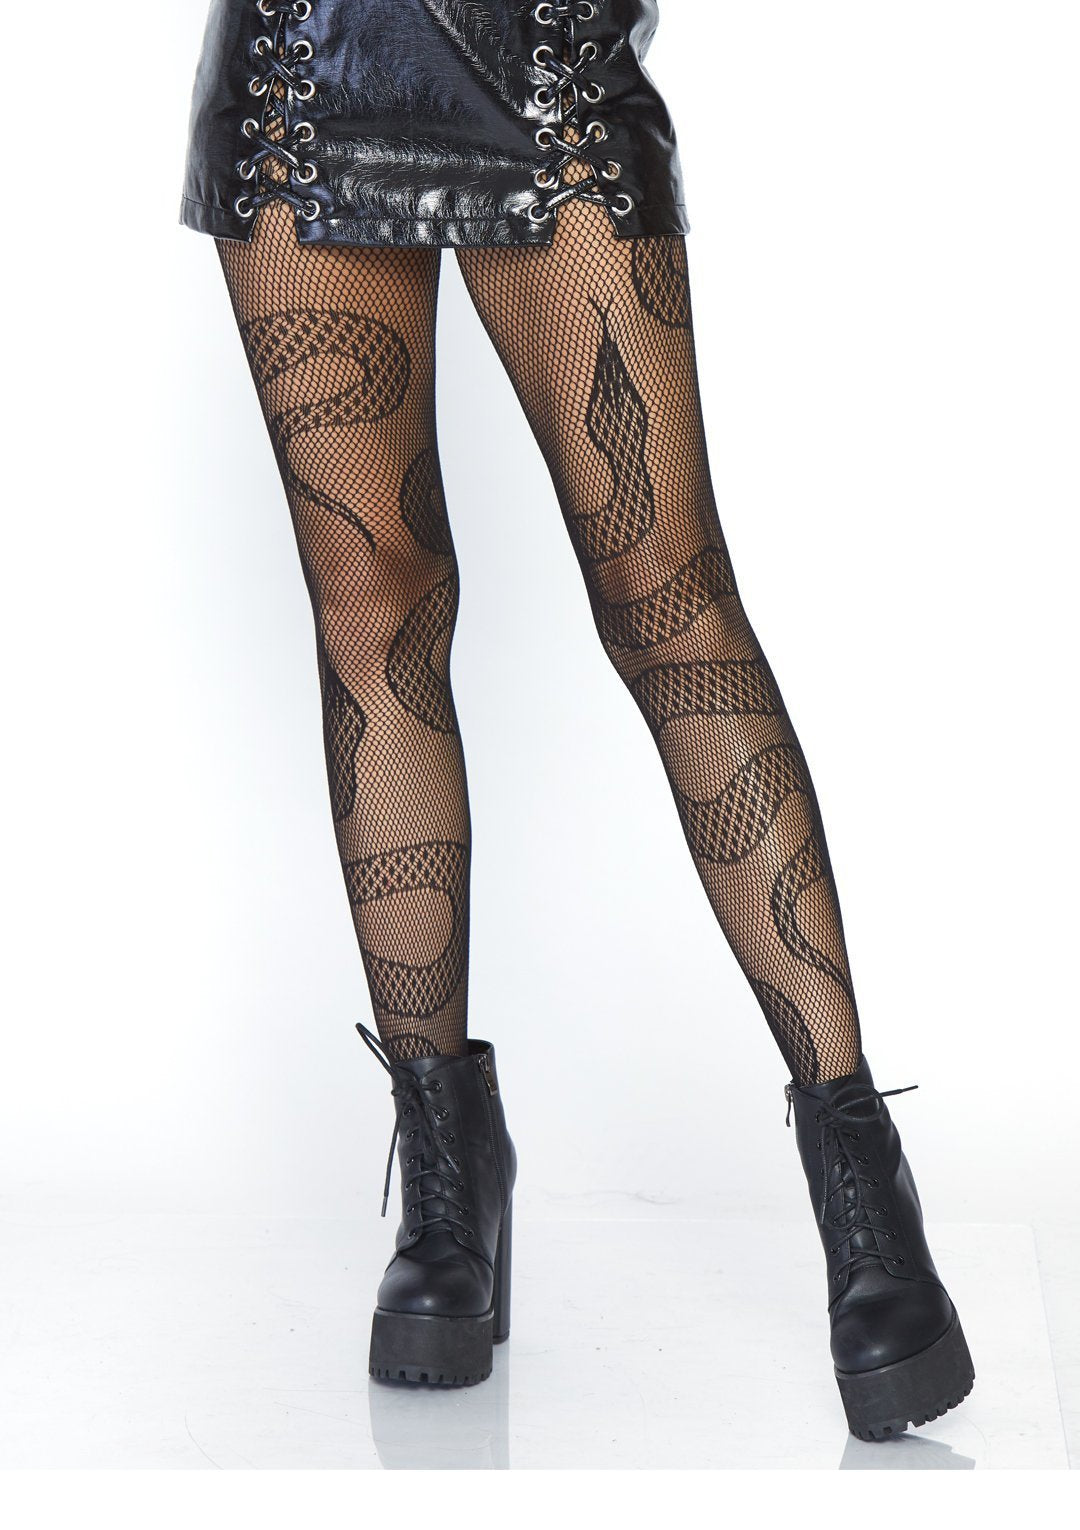 Sparkle Fishnet Tights Lace Patterned Rhinestone Snake Fishnets for Women